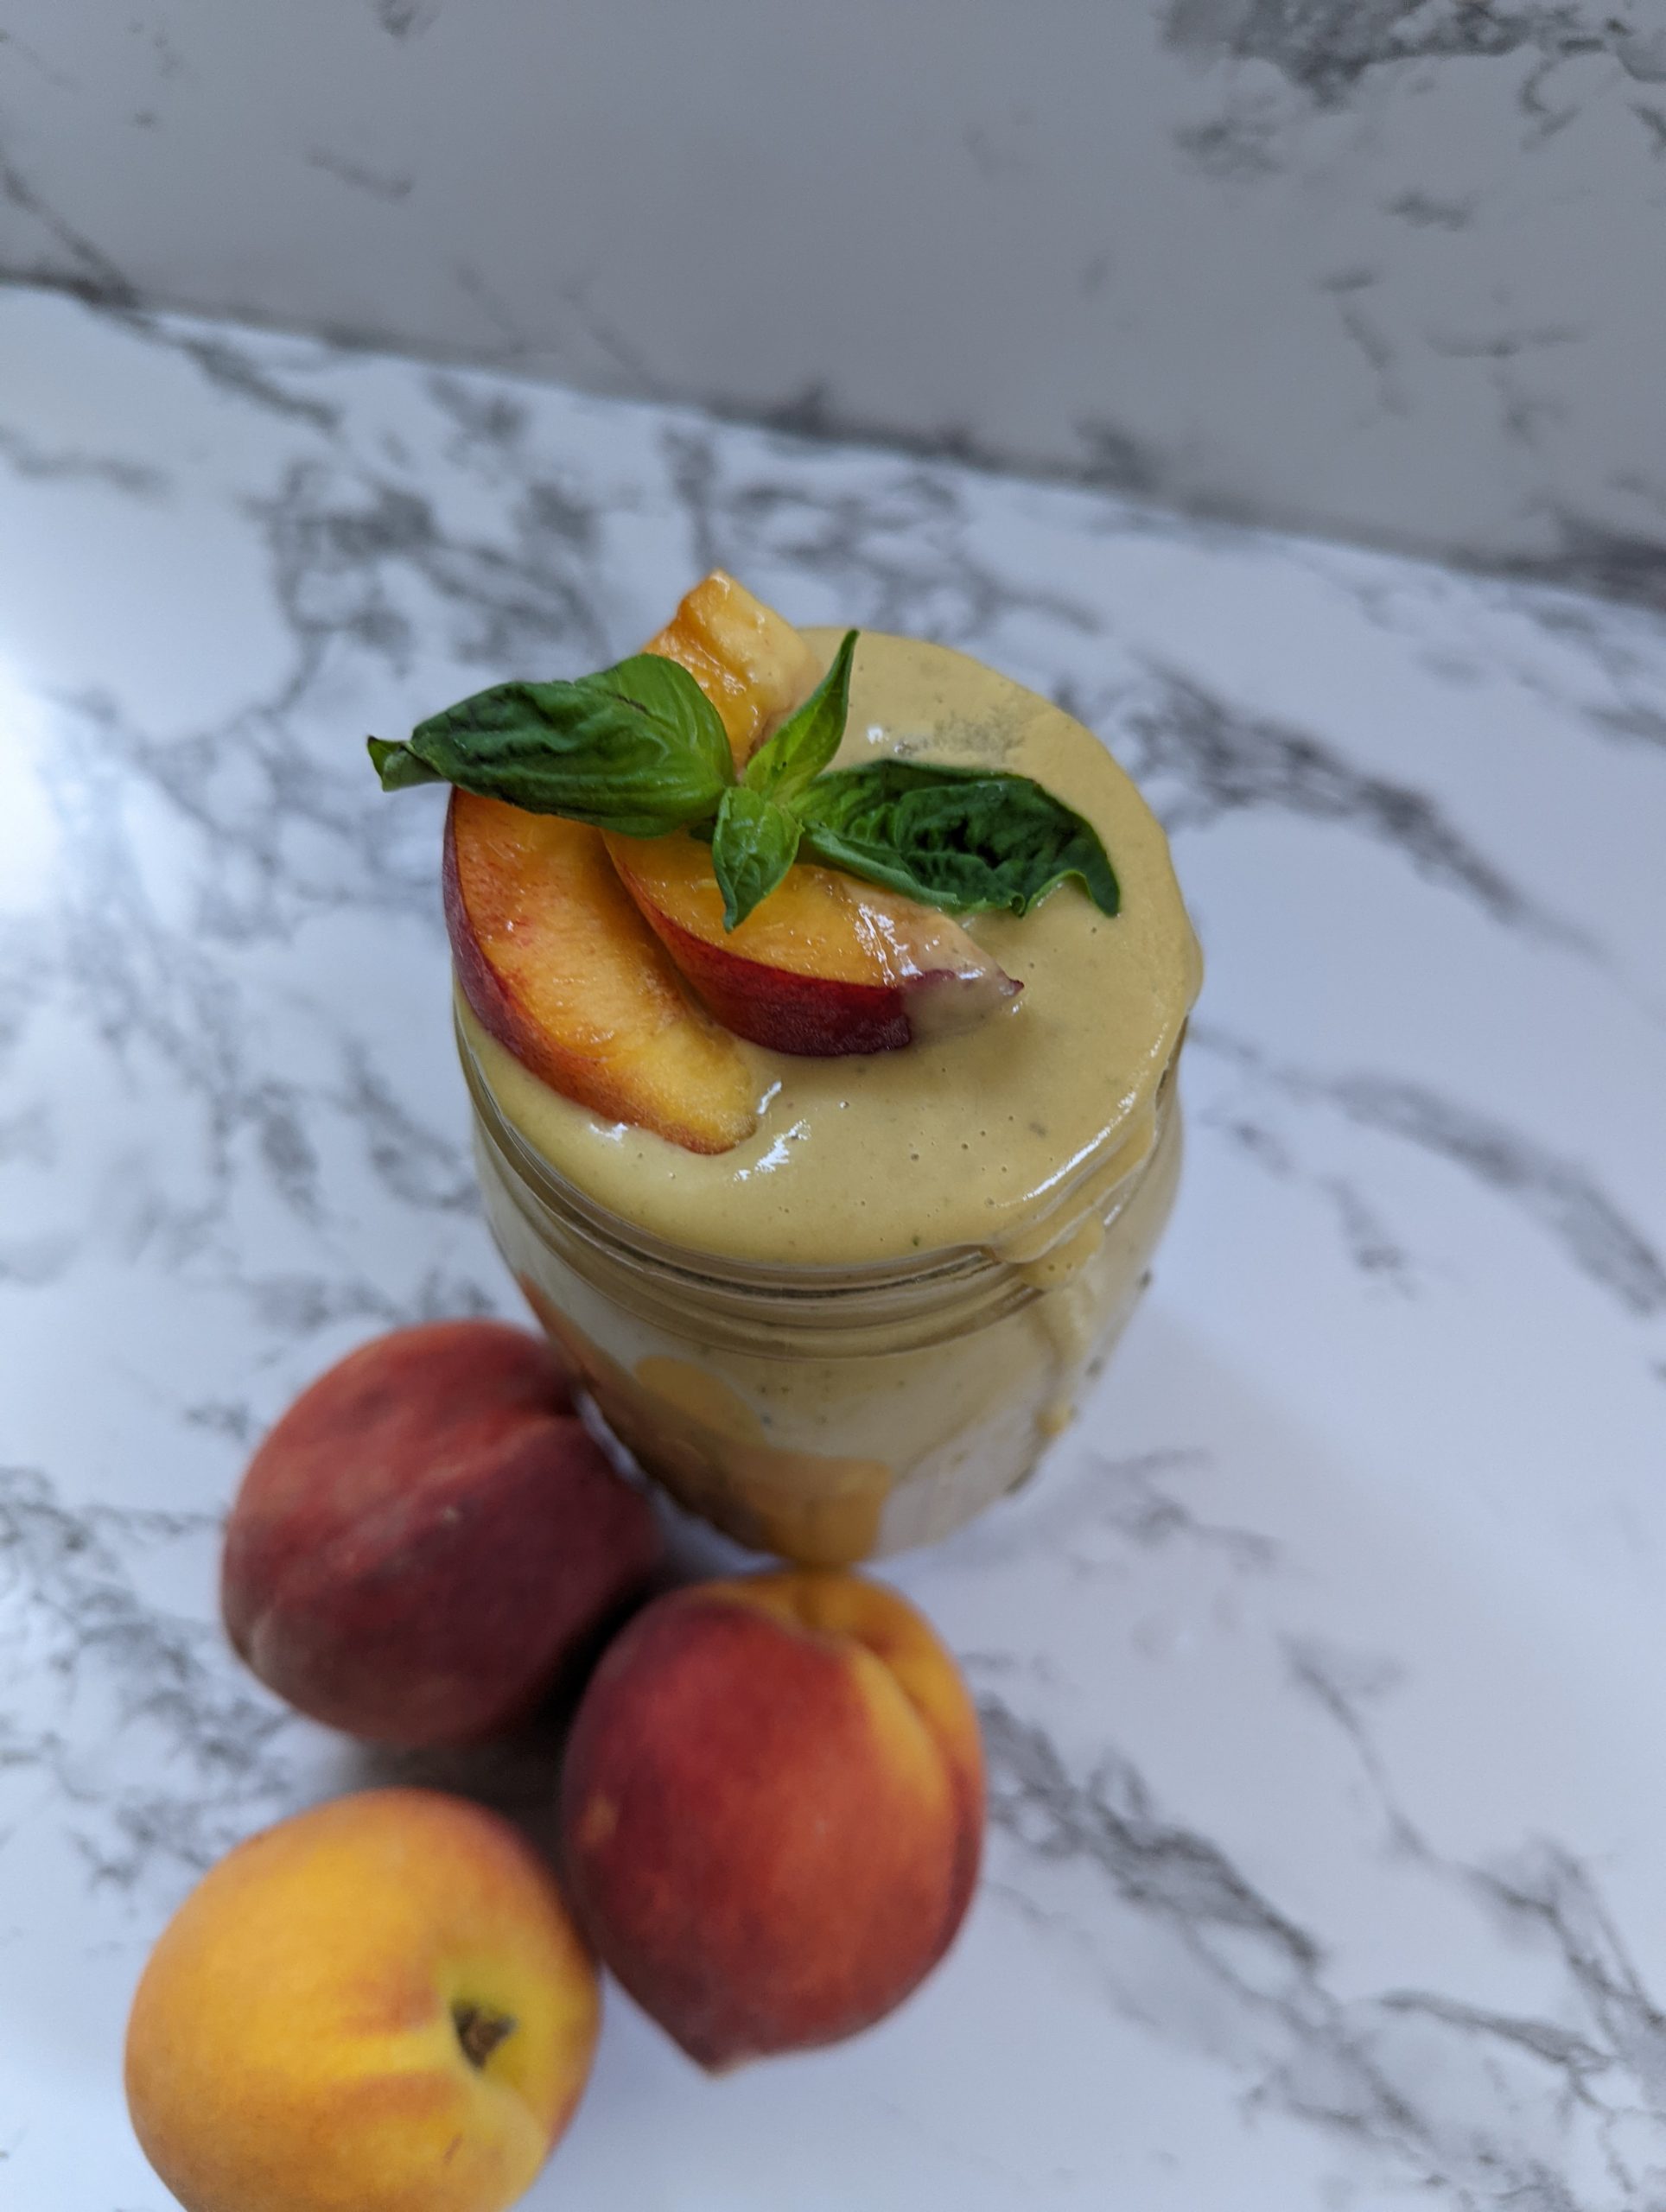 A glass jar filled with creamy peach basil smoothie with a peach wedge and basil leaf garnish